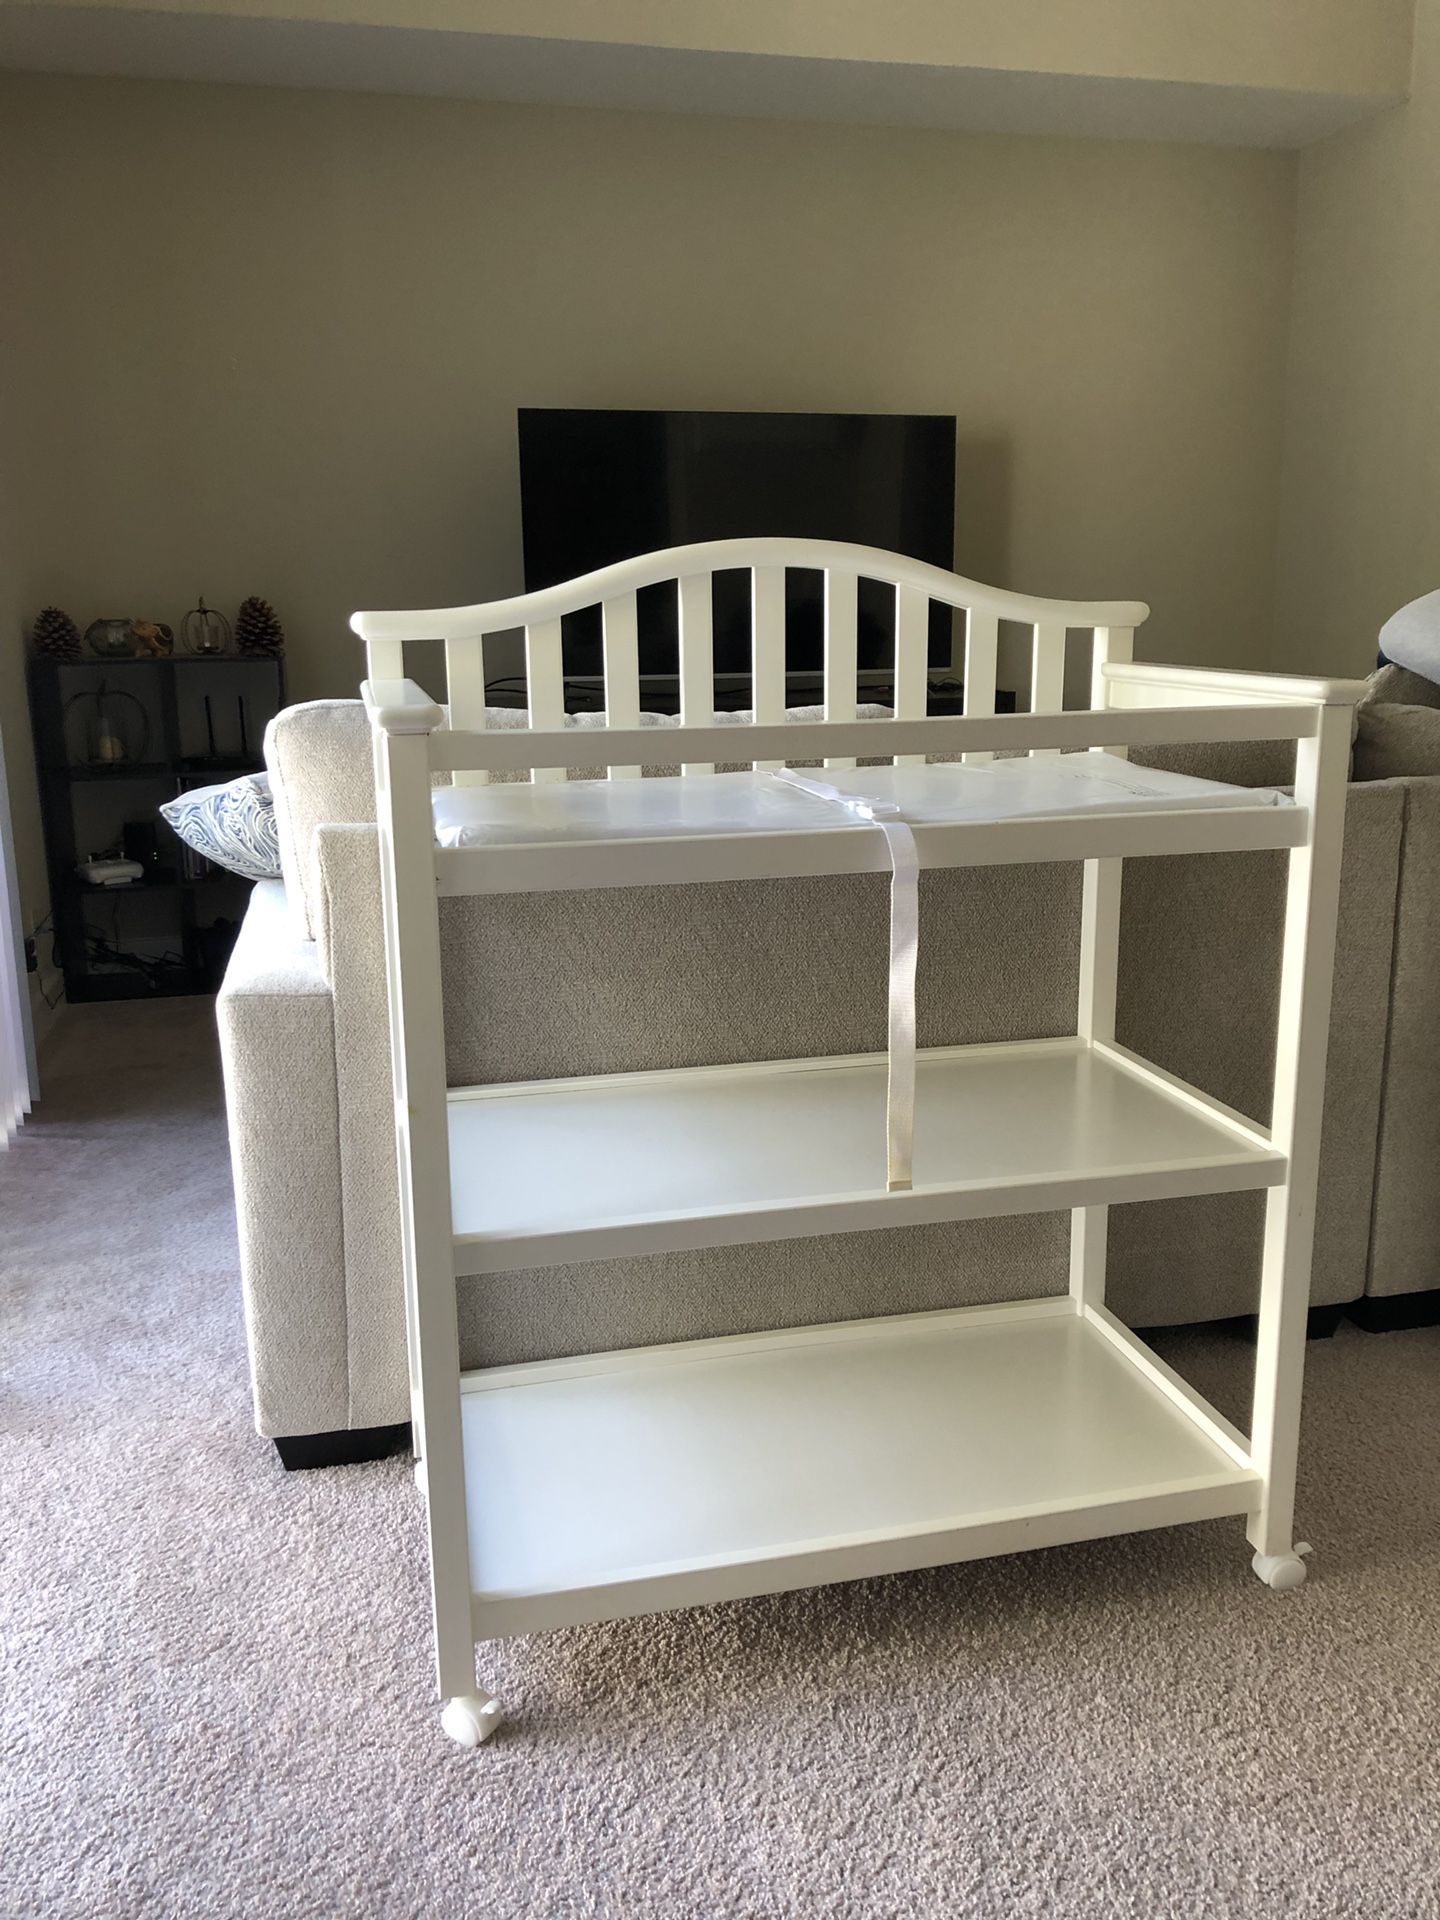 Graco Changing Table White on wheels